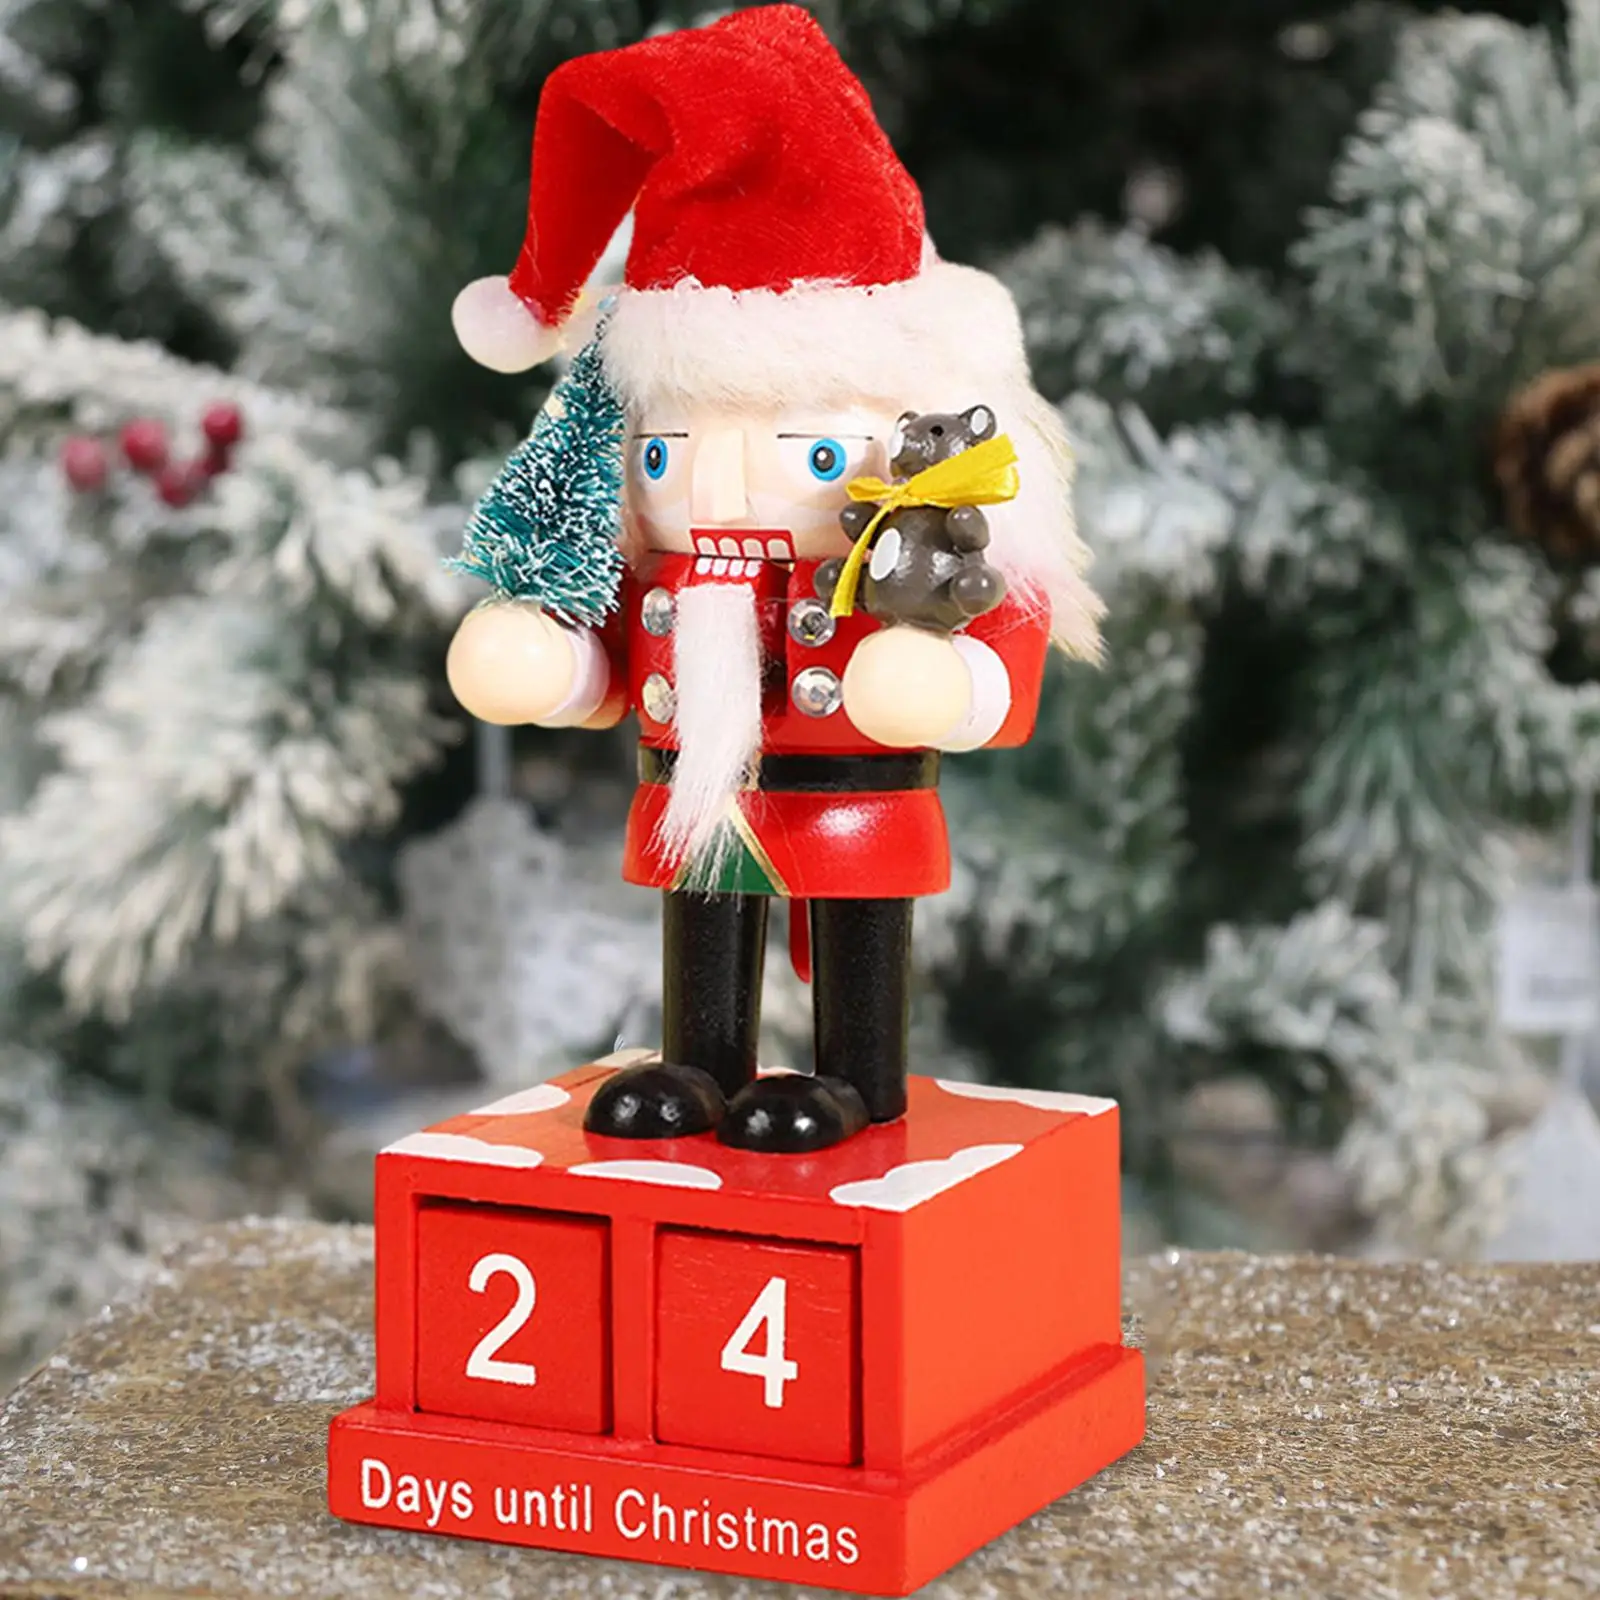 Xmas Calendar Xmas Gifts Santa Claus Perpetual Tabletop Decoration Square Number Calendar for Counter Christmas New Year